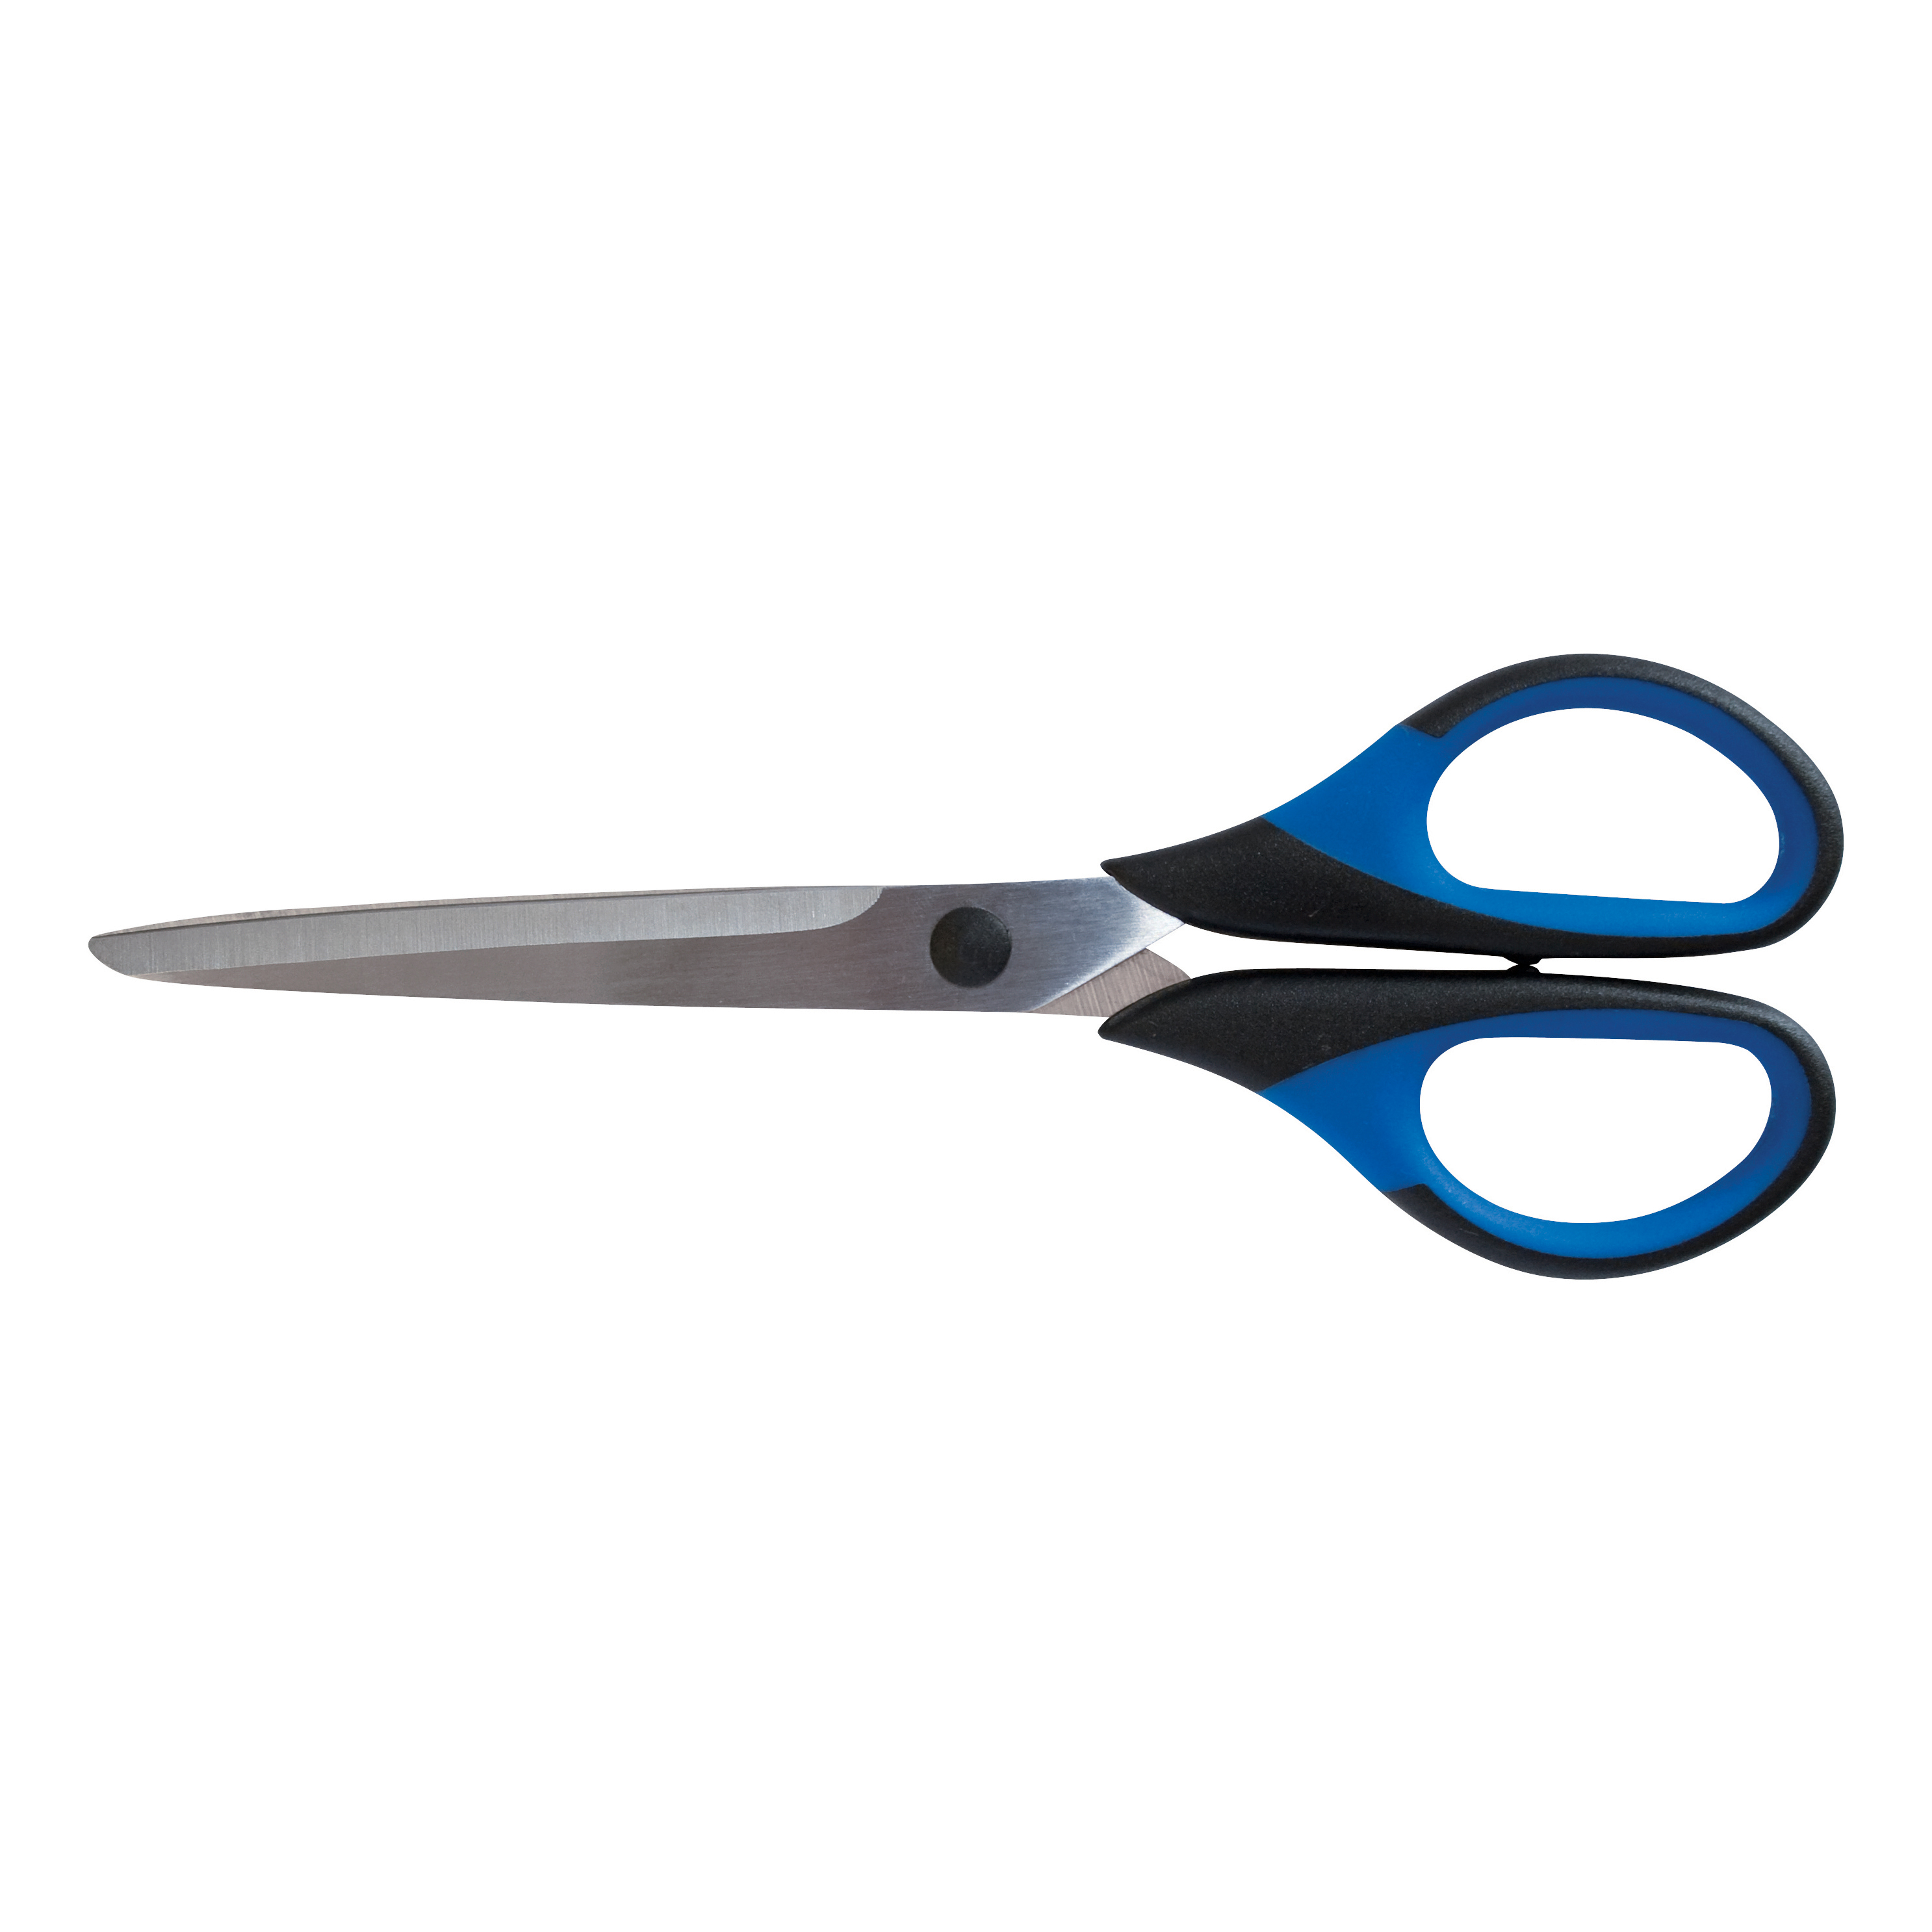 5 star elite scissors with rubber cushioned comfort grip